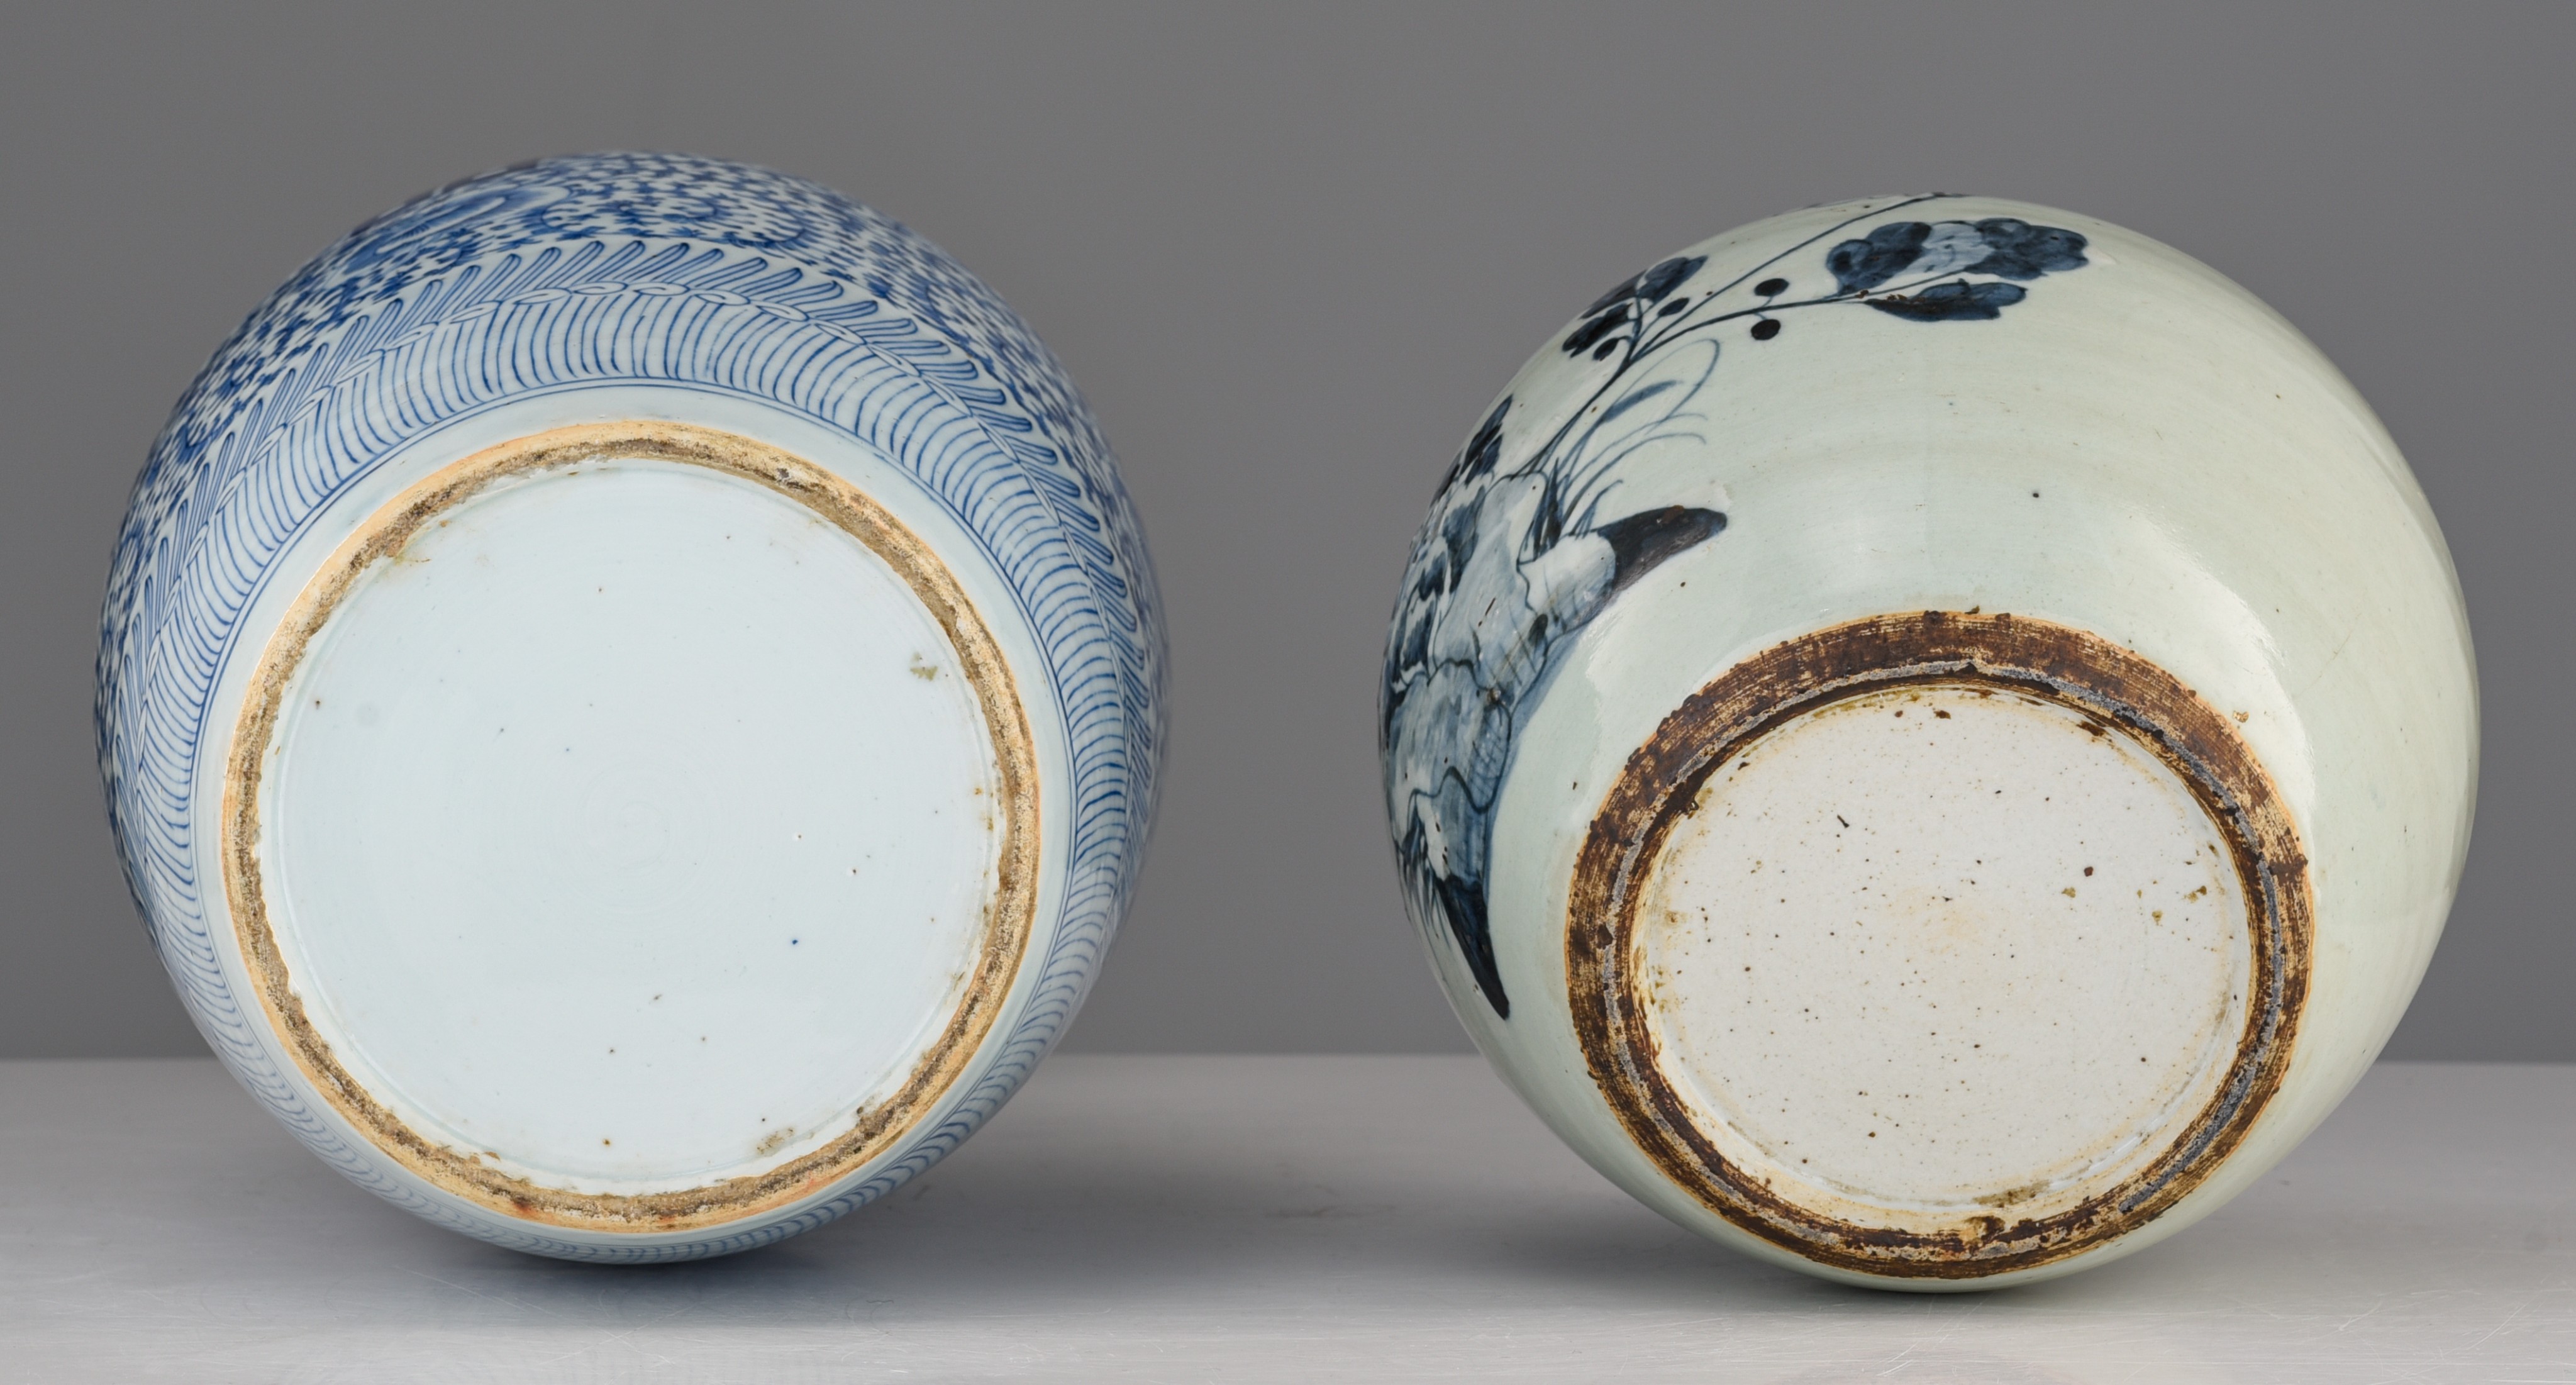 A Chinese blue and white 'Double-Xi' vase, 19thC, H 42,5 cm - added a blue and white on celadon grou - Image 7 of 7